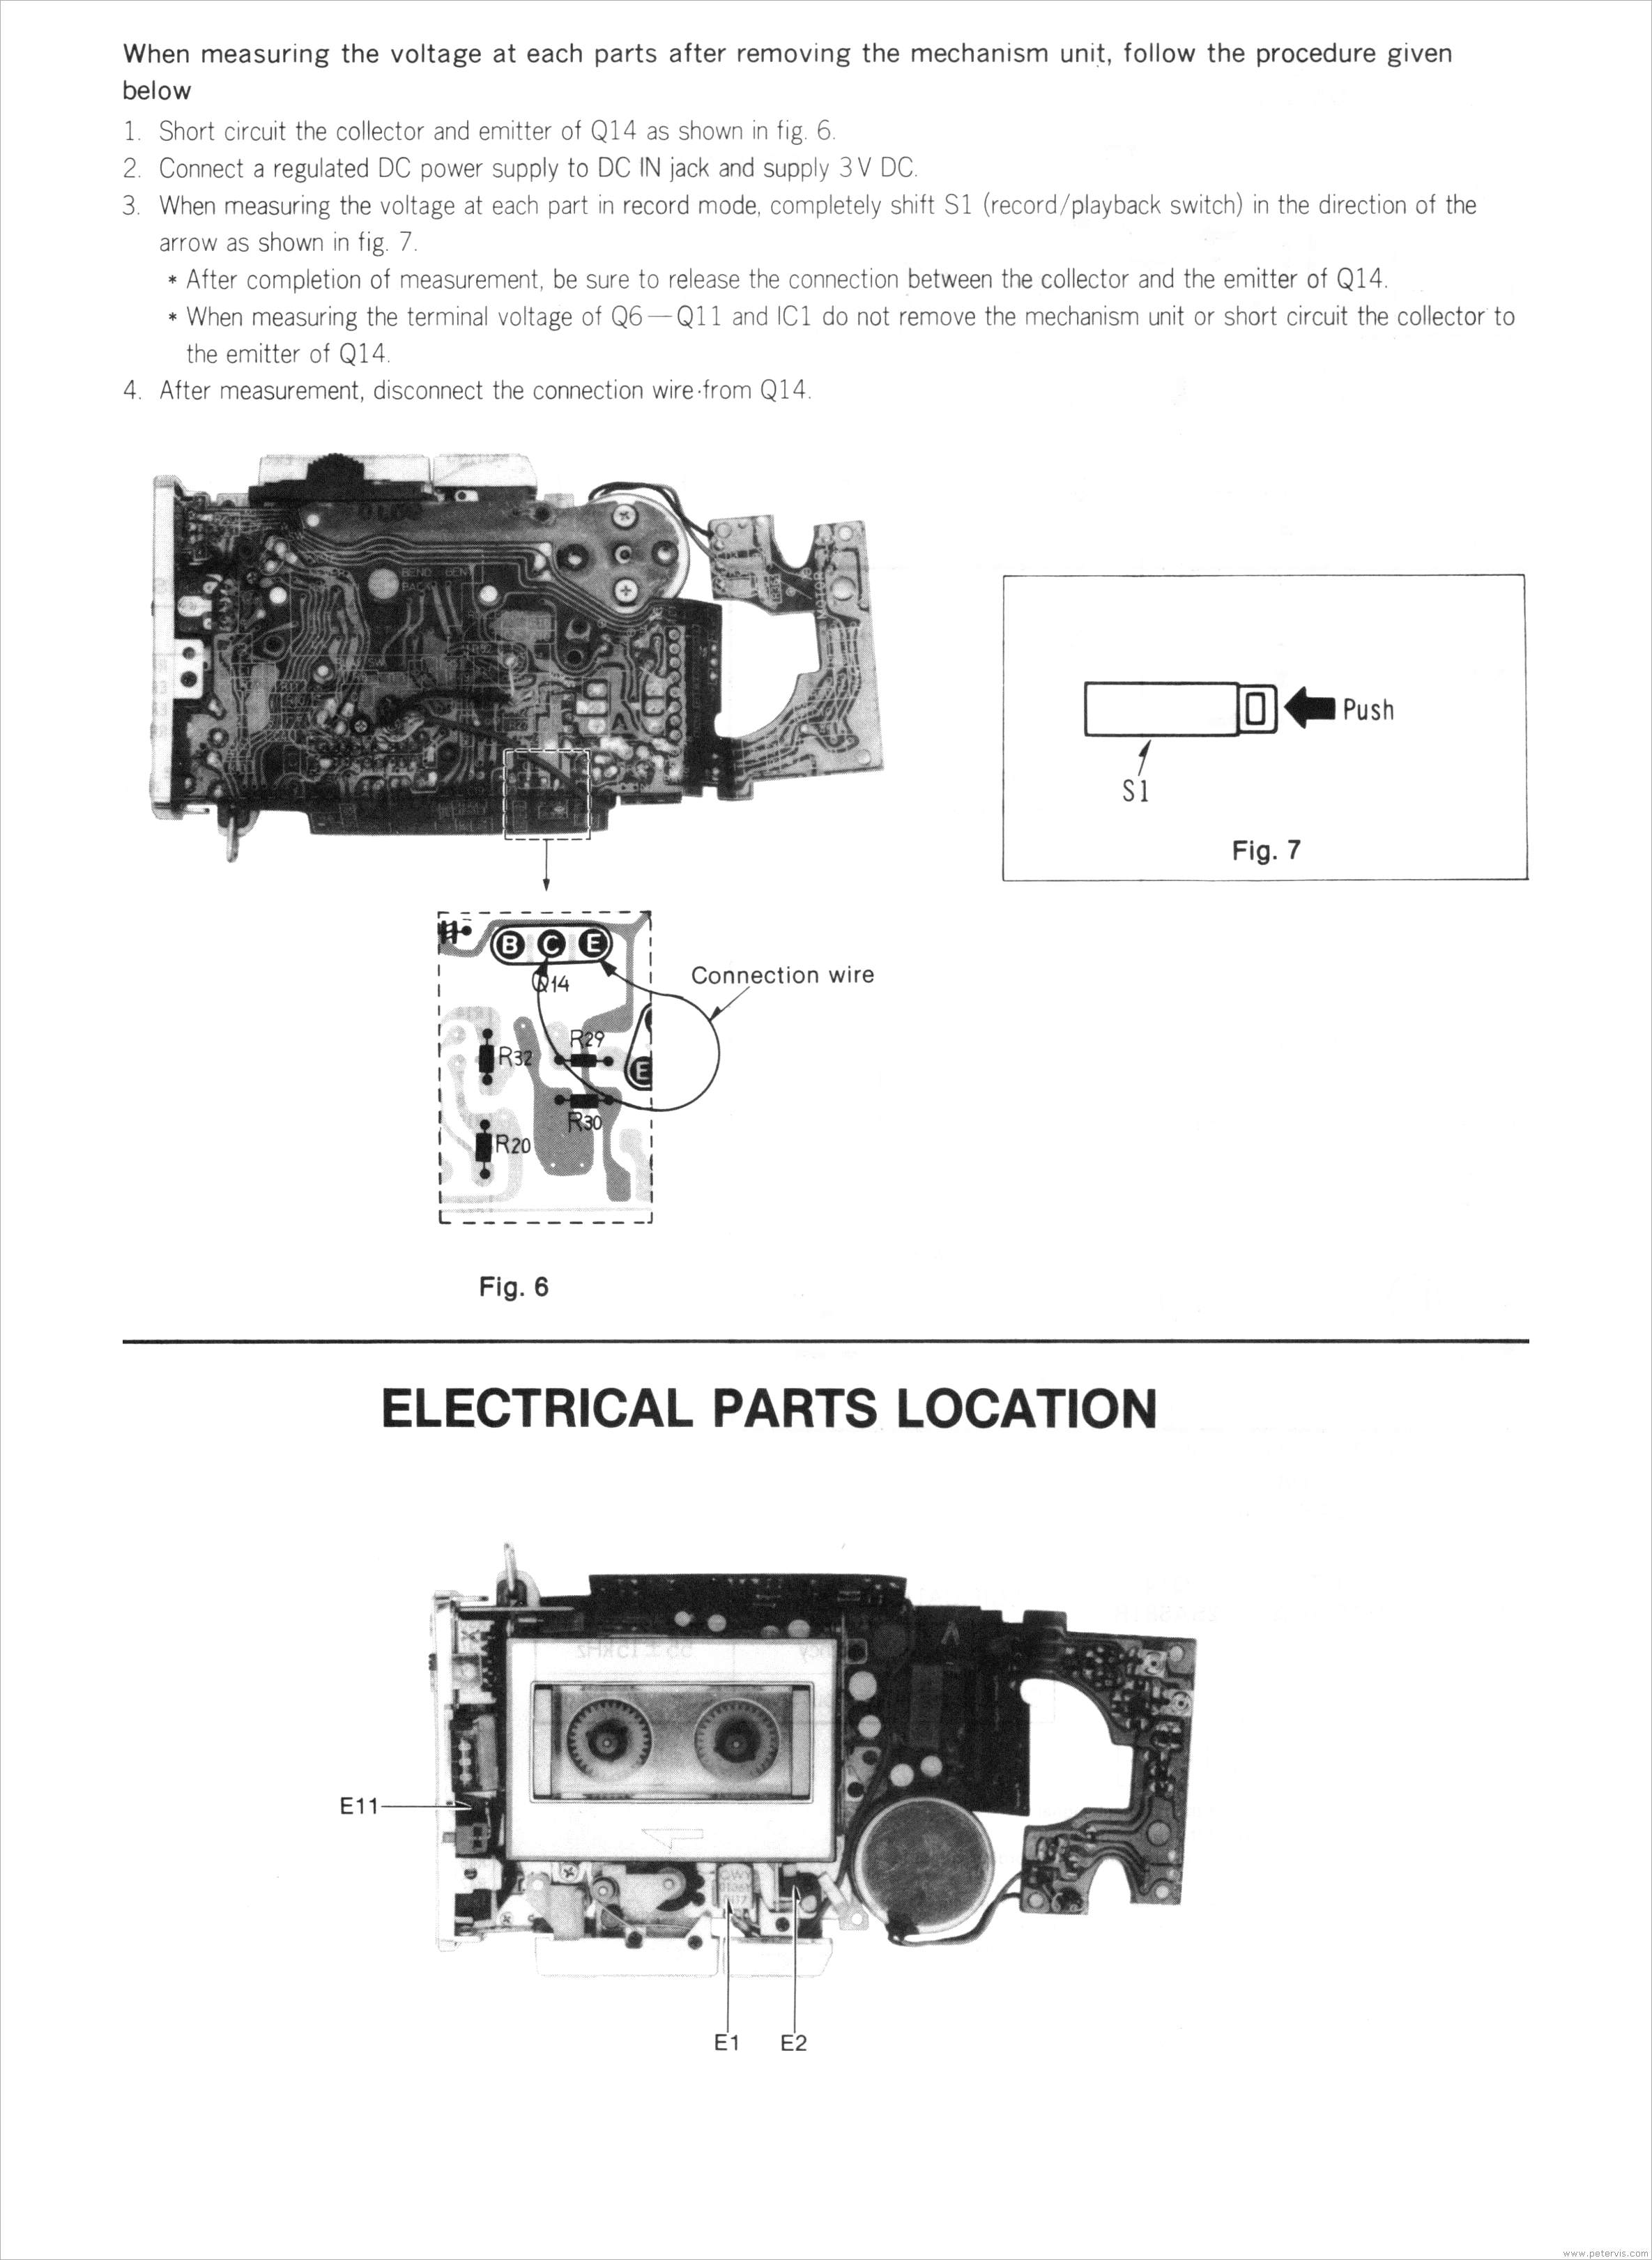 ELECTRICAL PARTS LOCATION